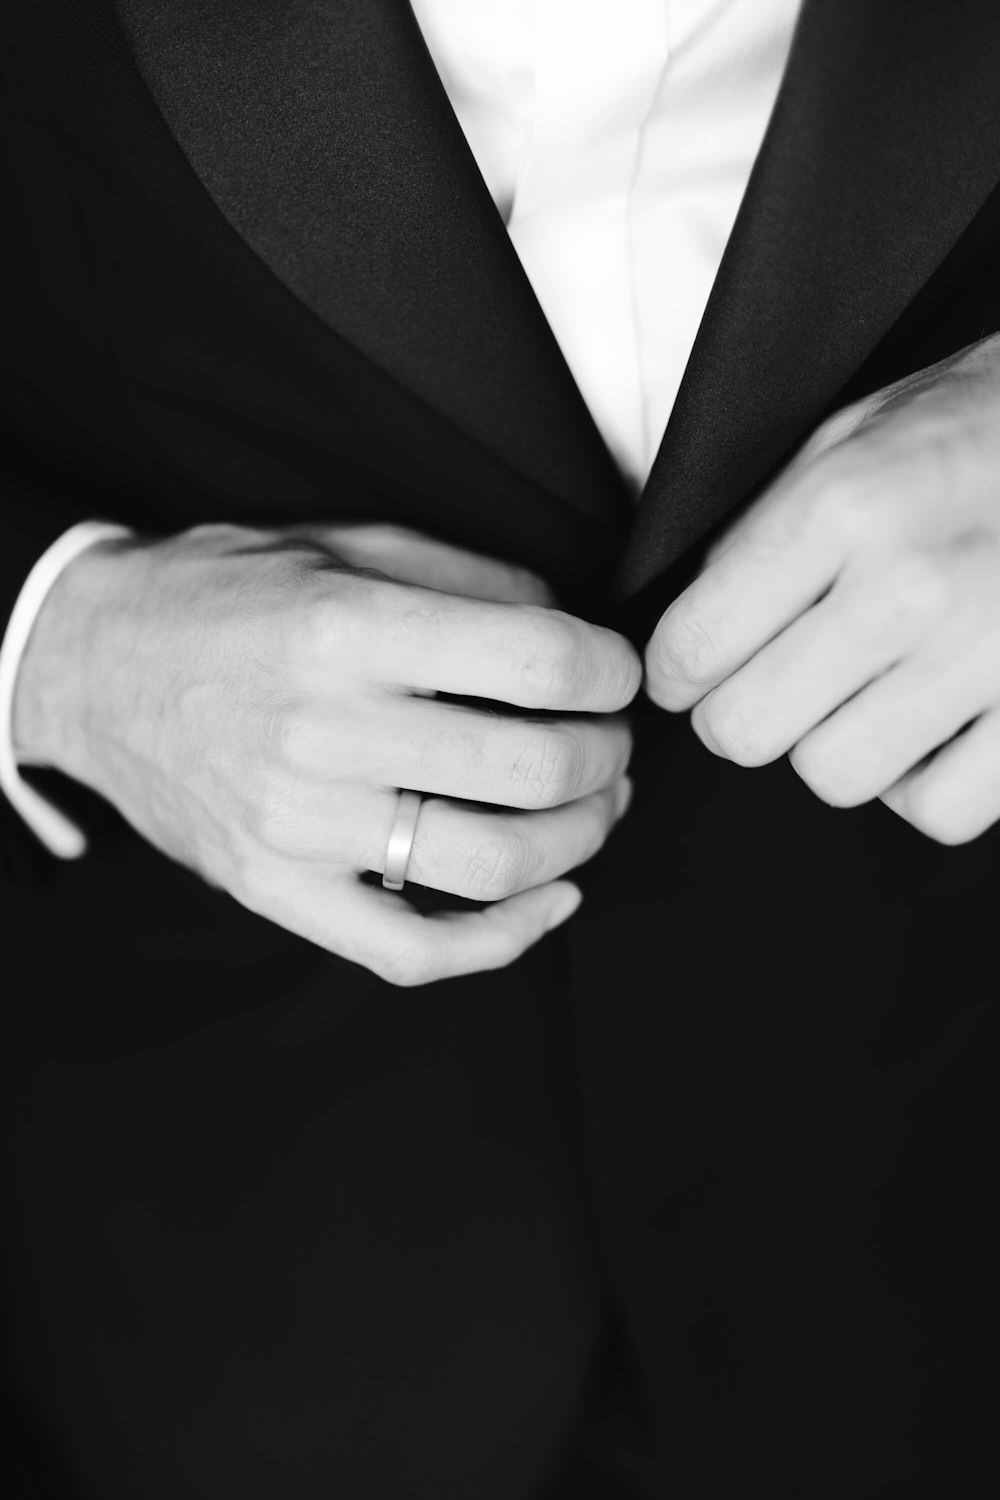 a close up of a person wearing a suit and tie